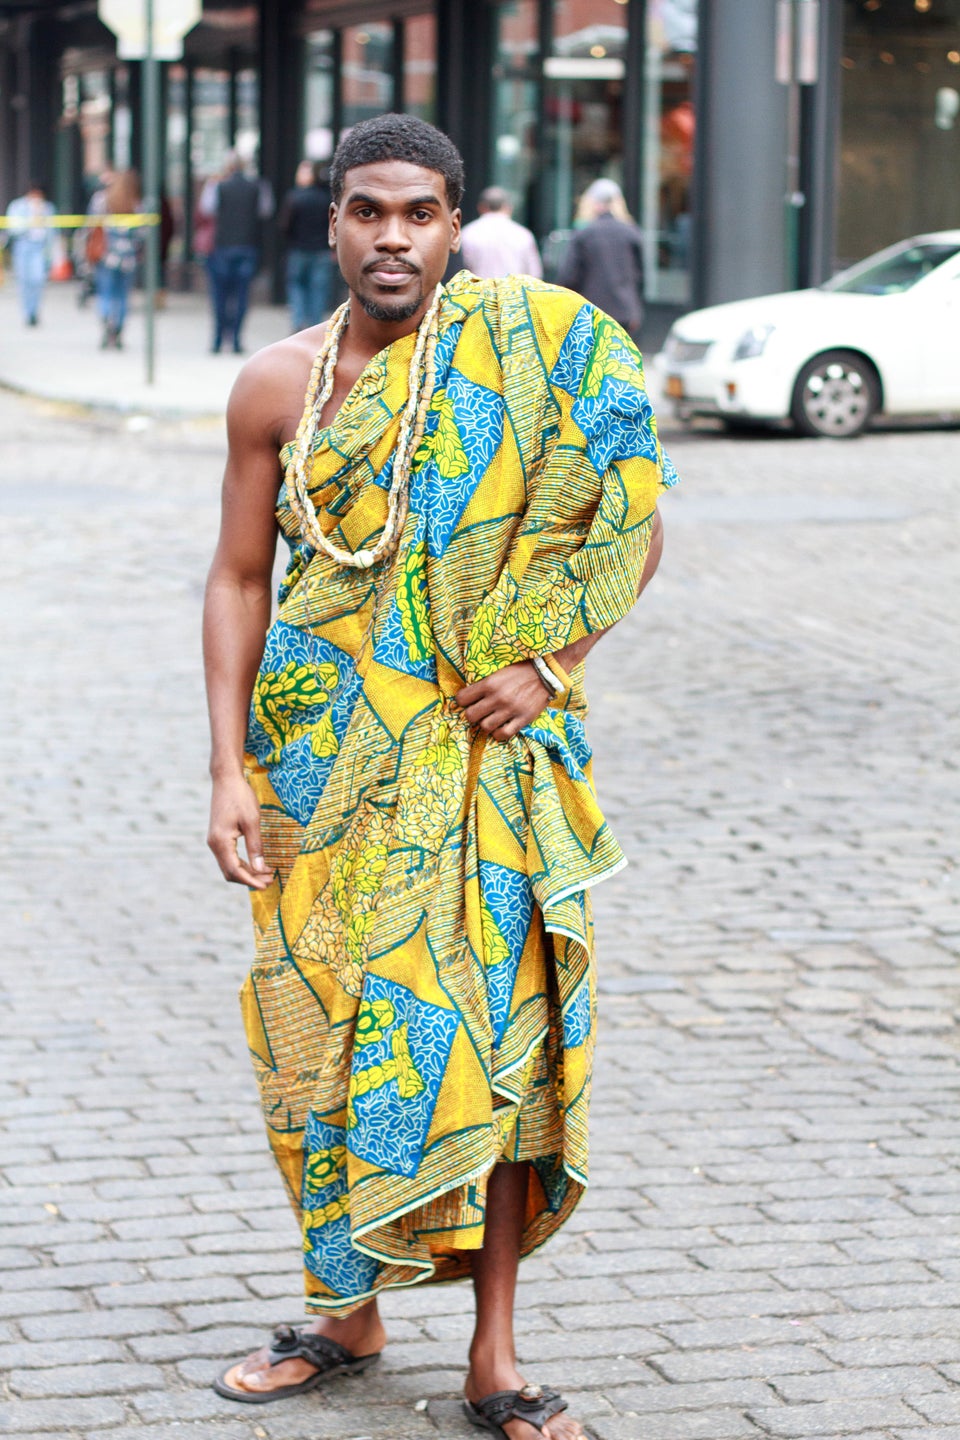 We Found Social Media Sensation ‘African Bae’ (and He Totally Lives Up to the Hype)